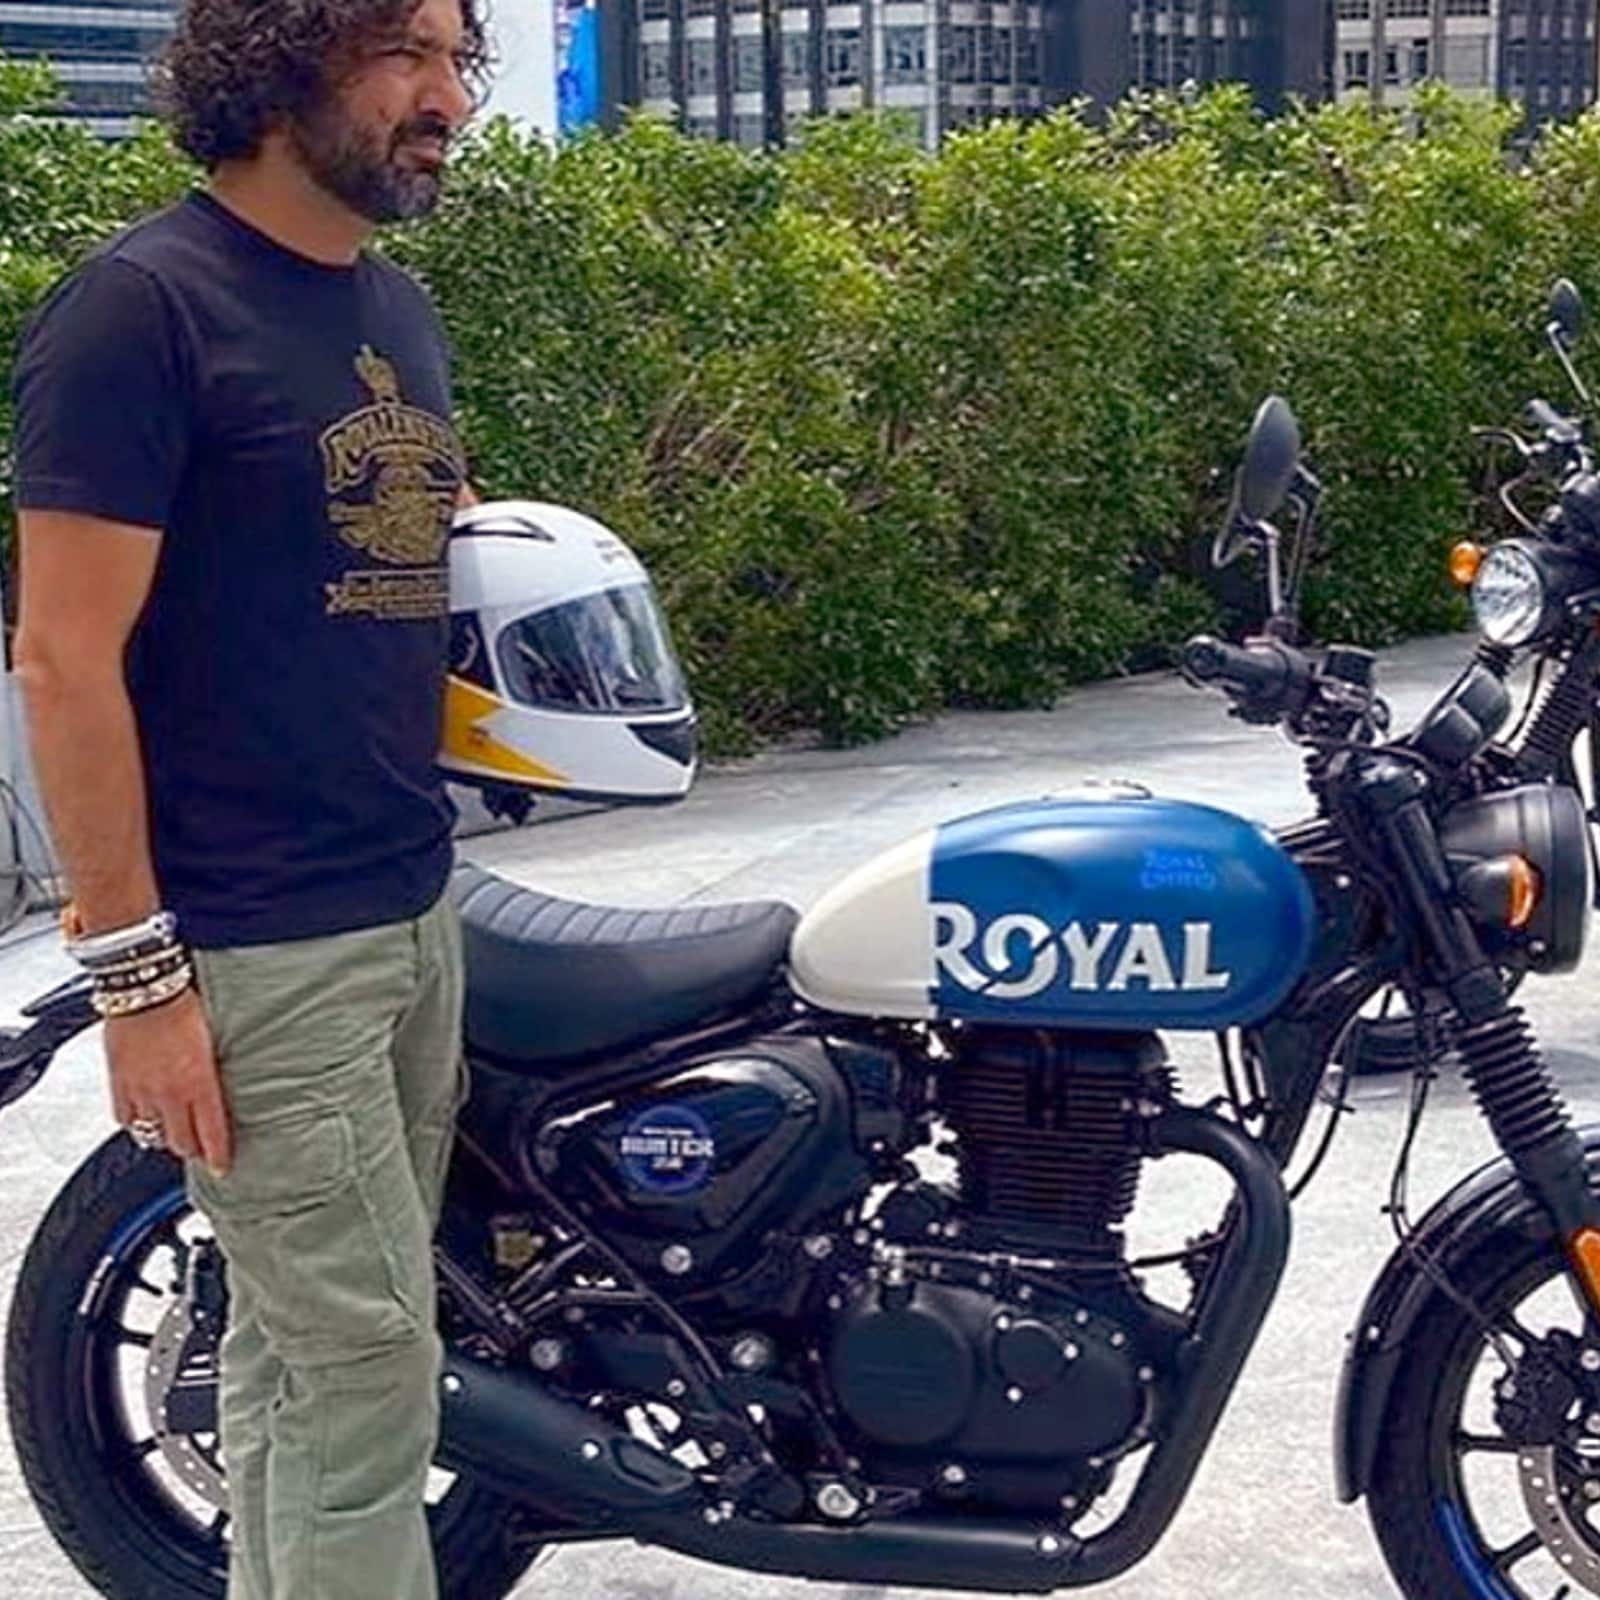 Royal Enfield Hunter 350 unveiled: Detailed image gallery of